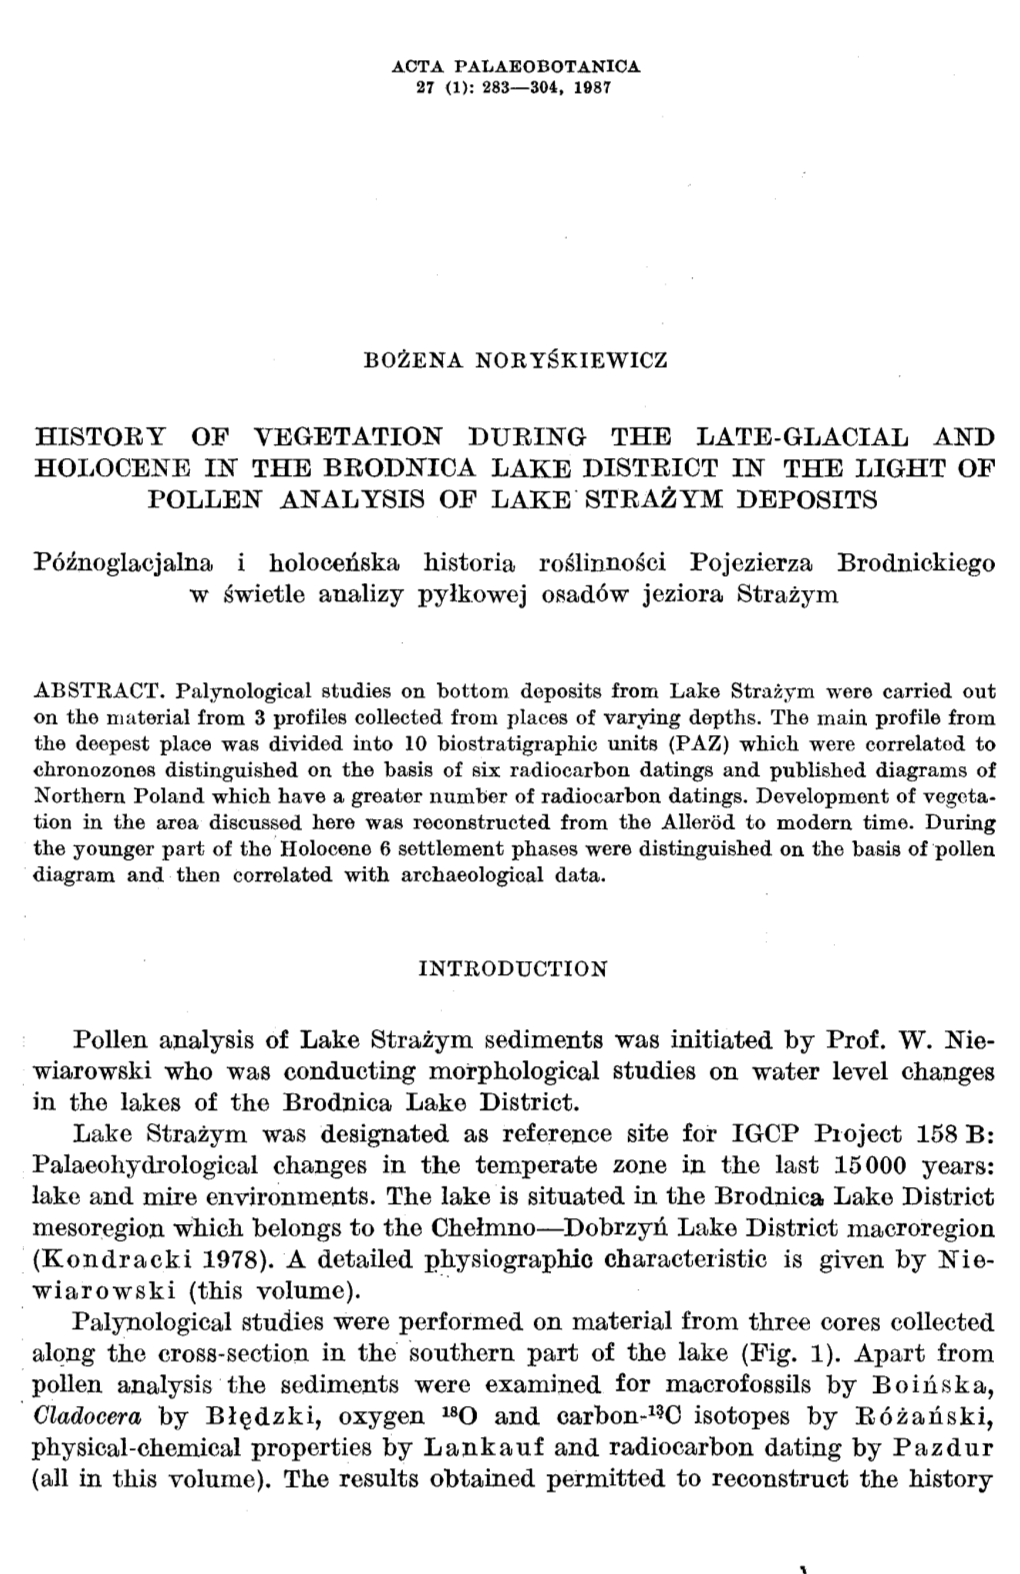 History of Vegetation During the Late-Glacial and Holocene in the Brodnica Lake District in the Light of Pollen Analysis of Lake" Strazym Deposits